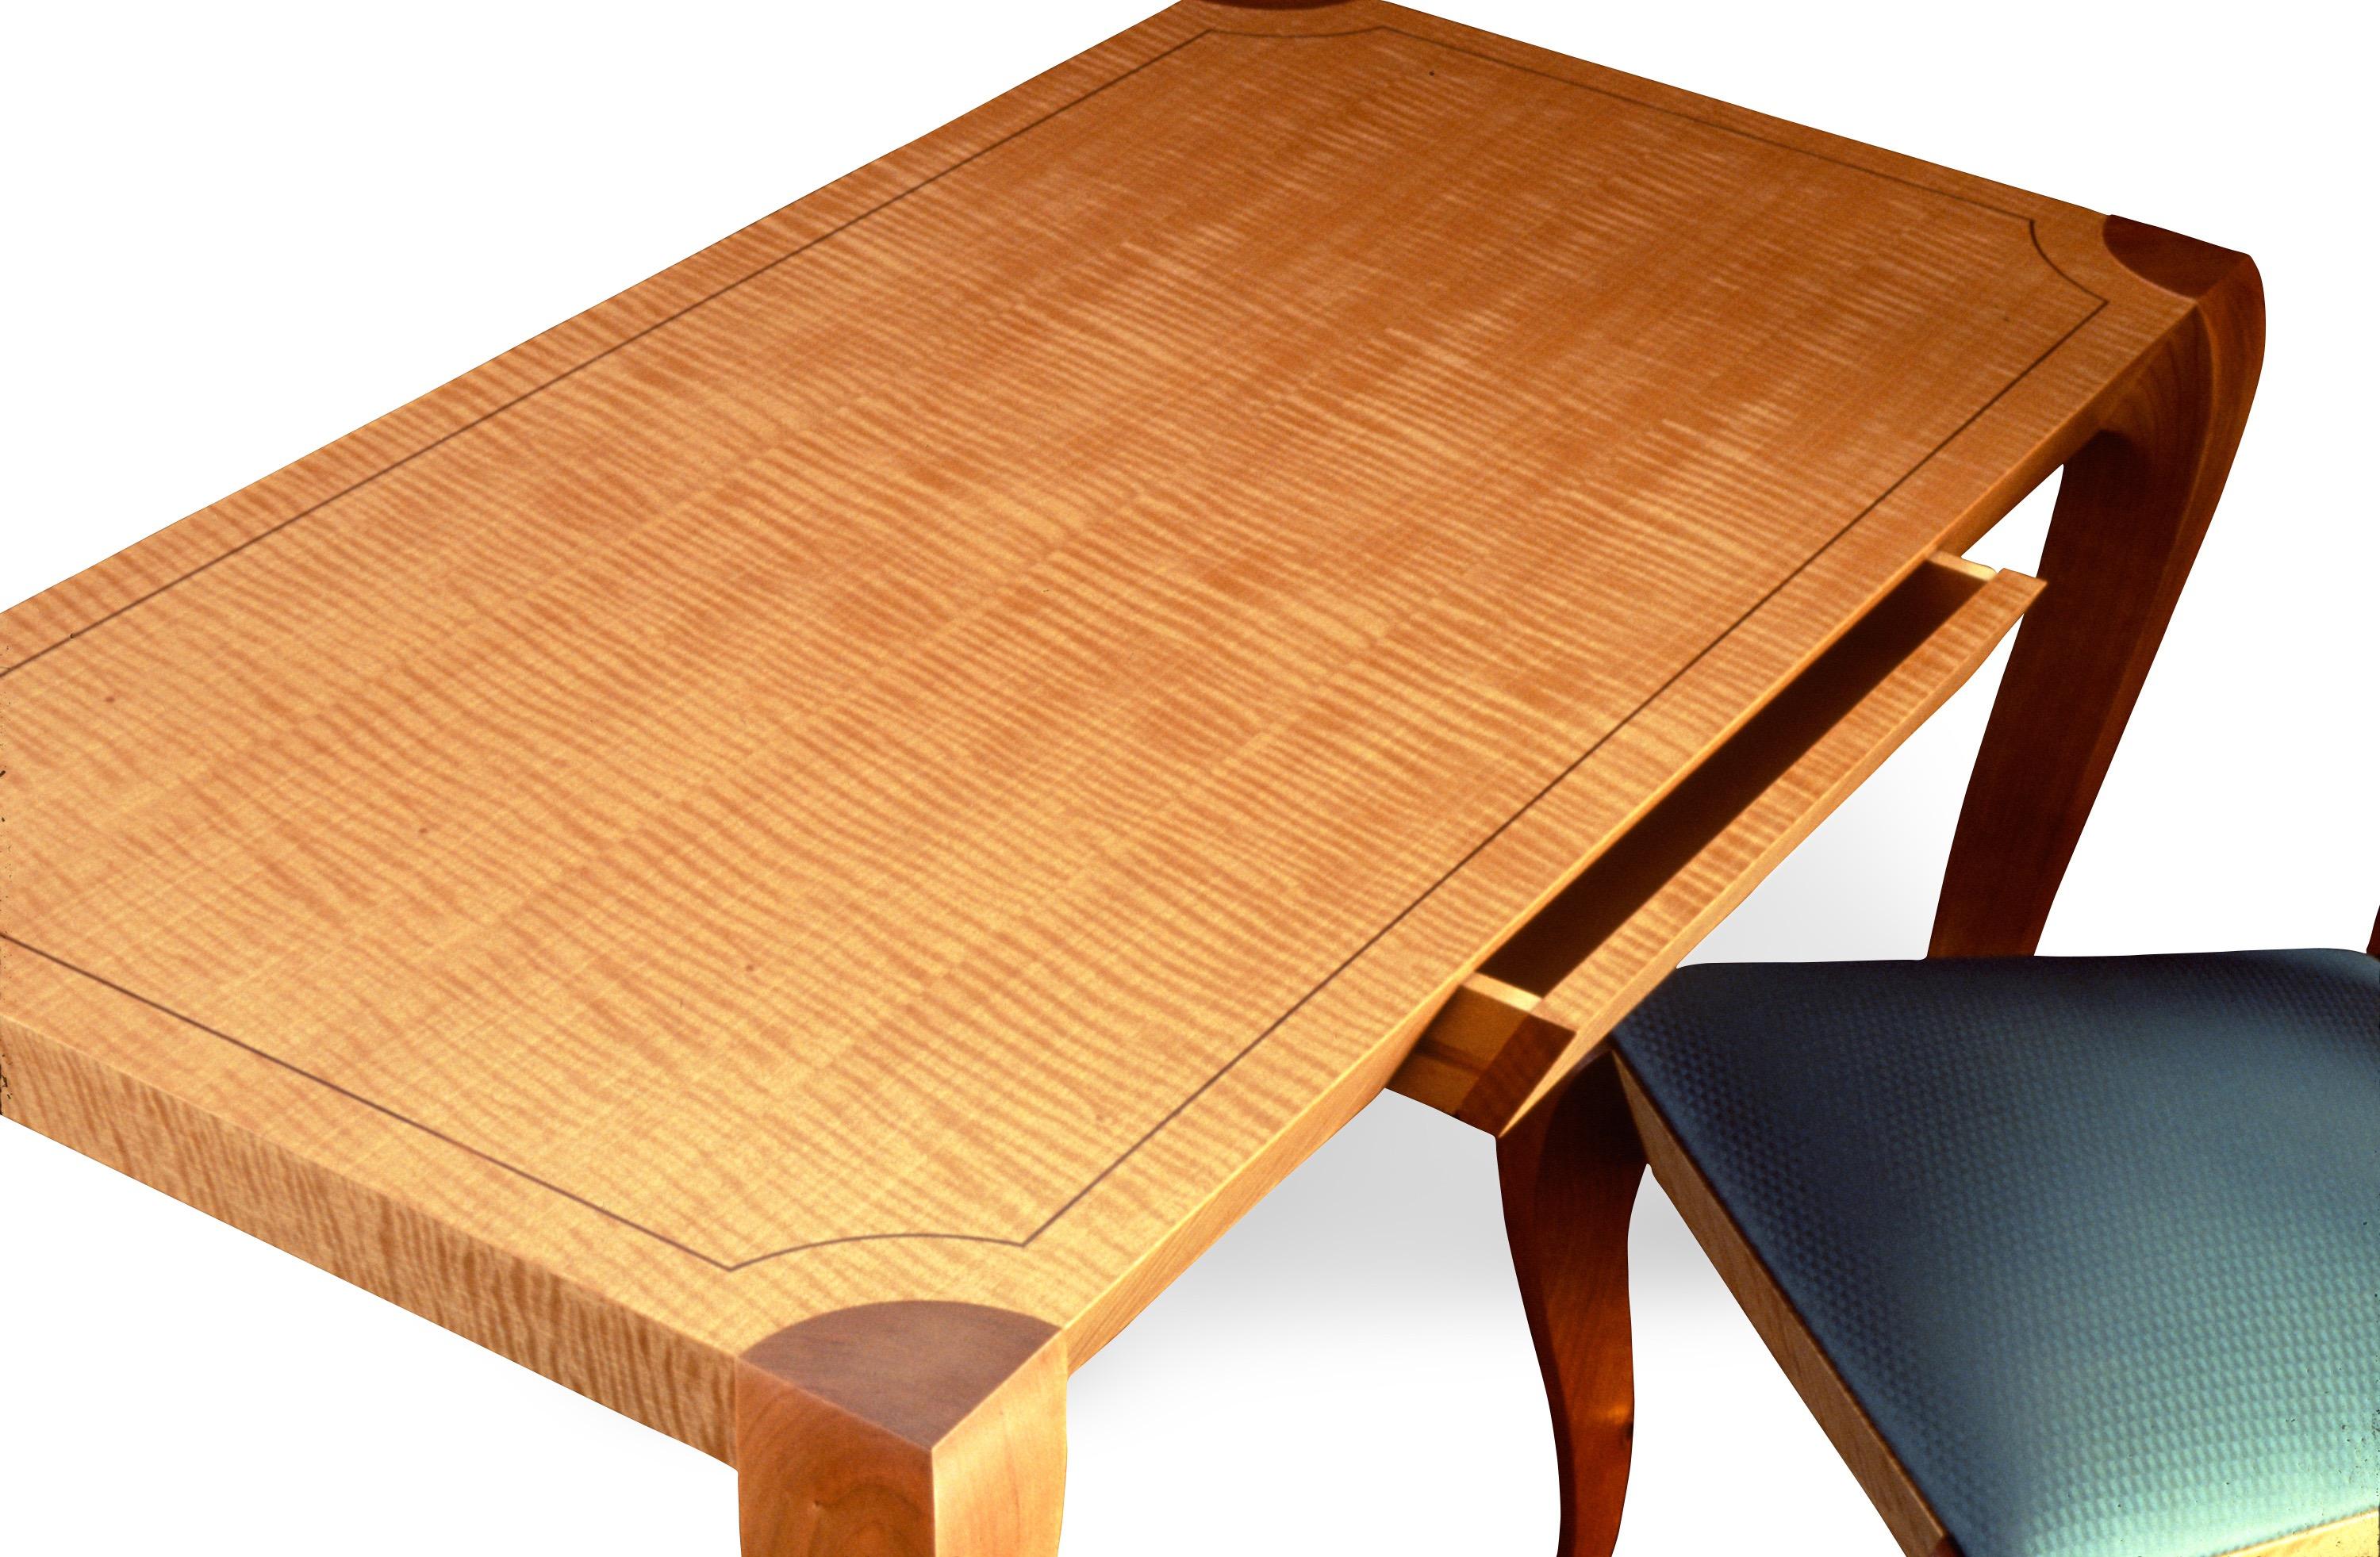 Hand-Crafted Gazelle Writing Table, Handcrafted Contemporary Desk in Art Deco Style For Sale